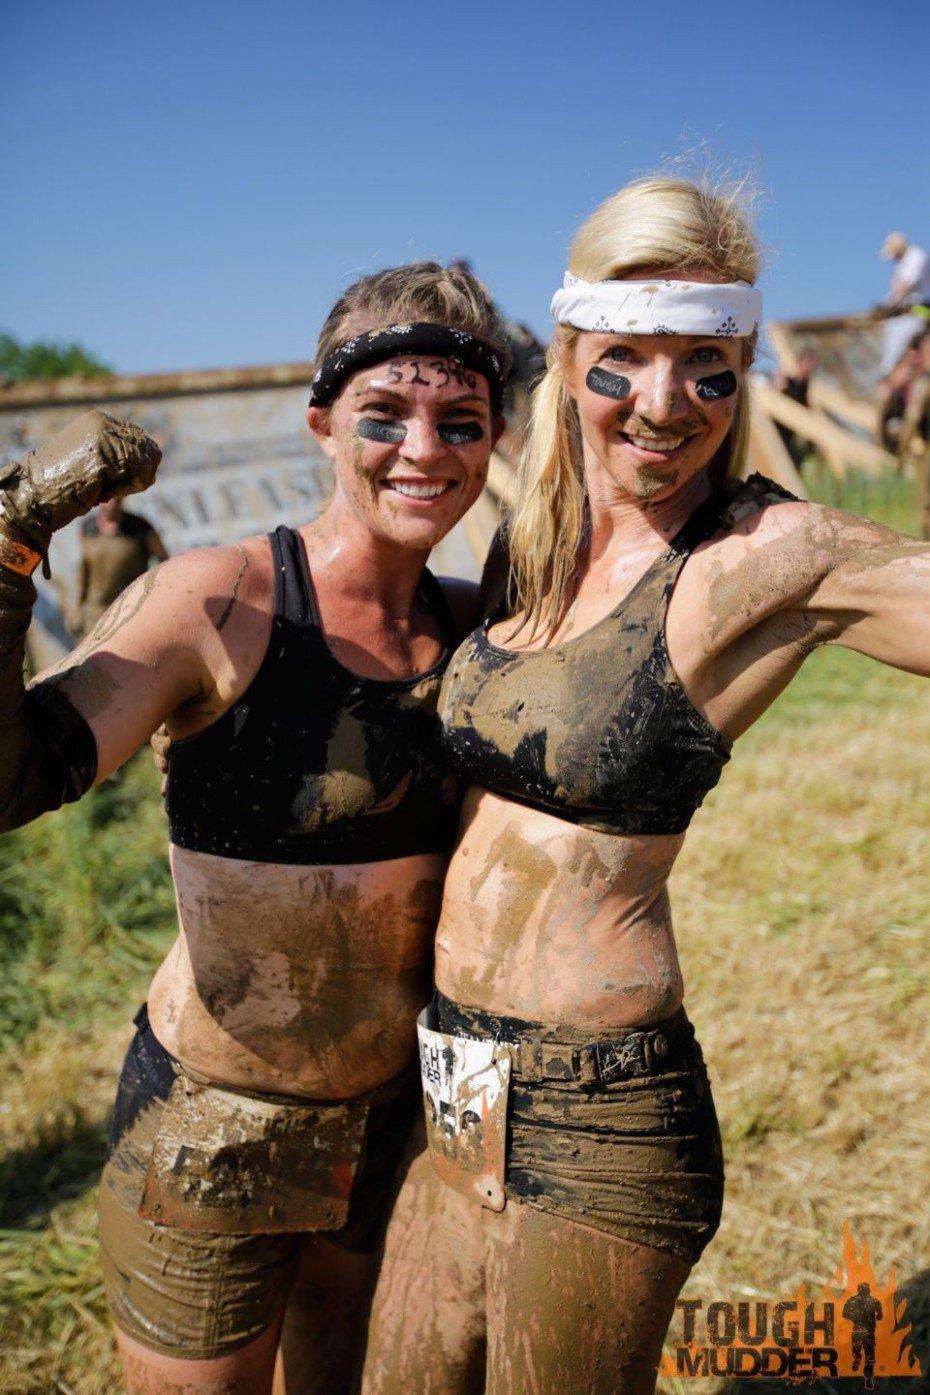 25 Hottest Photos Of Girls Doing Adventure Races